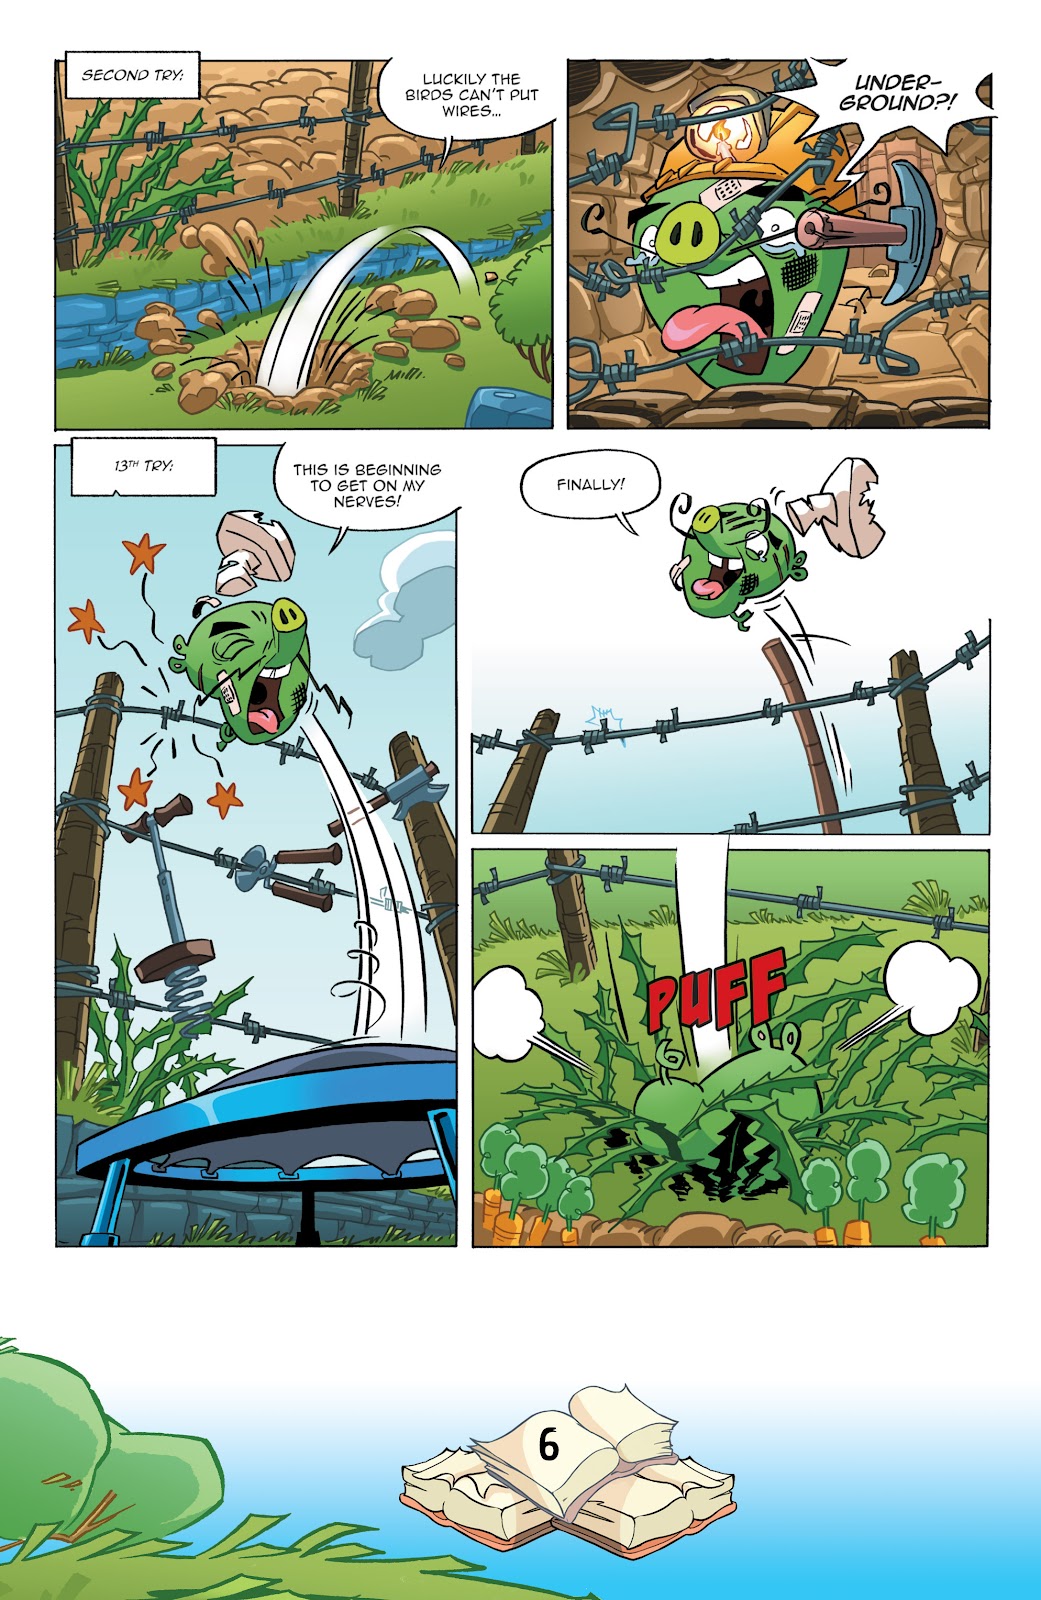 Angry Birds Comics 2016 Issue 8 Read Angry Birds Comics 2016 Issue 8